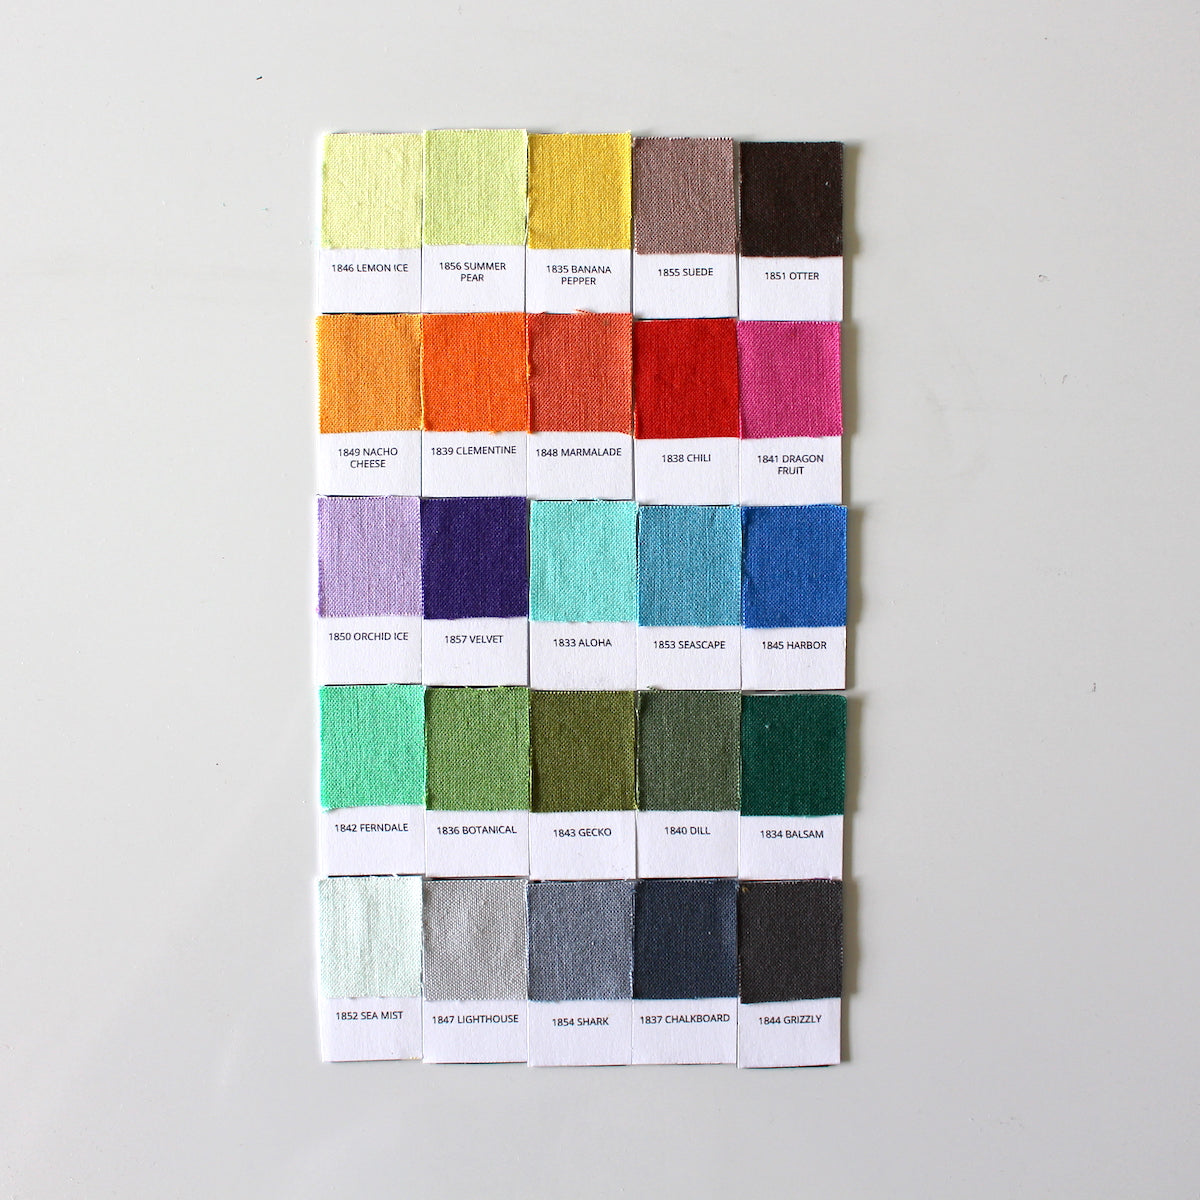 Kona Cotton fabric swatch magnets from 2019 25 new colors